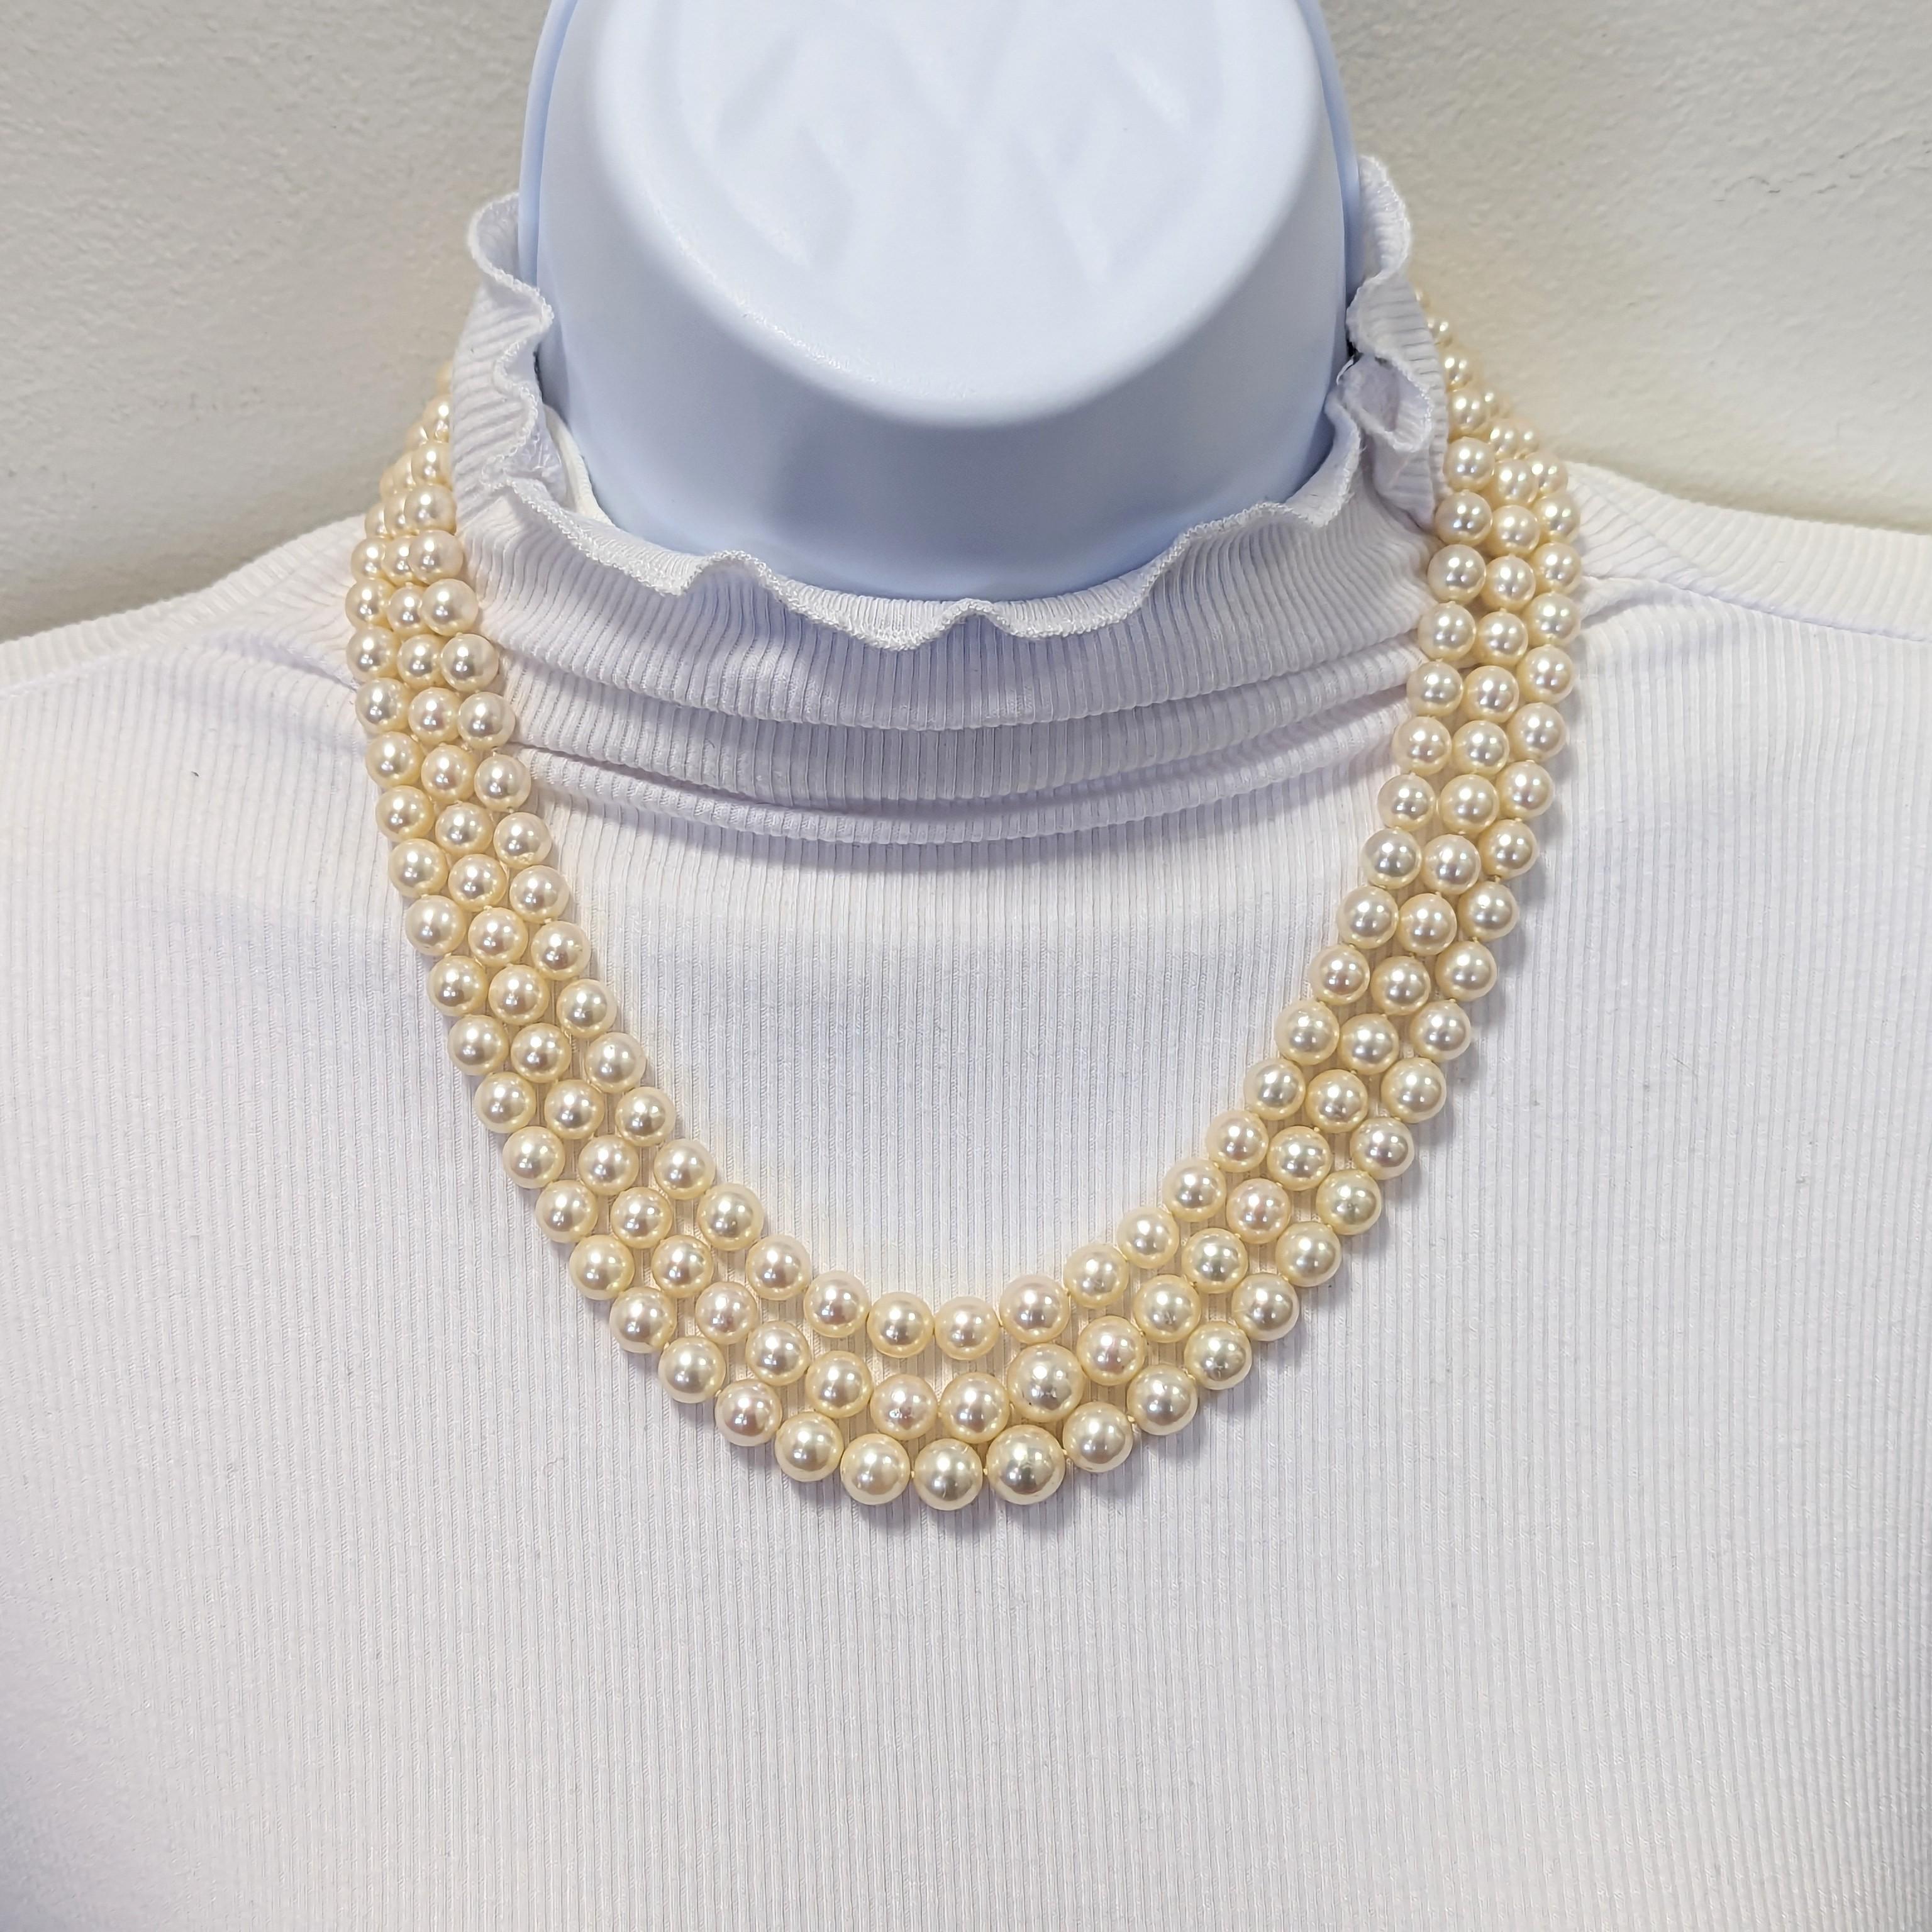 Beautiful white Akoya pearls size 7-8.5 mm each with a lovely clasp handmade in 14k yellow gold with white round Akoya pearls and carved emeralds, pink sapphire rounds, and blue sapphire rounds.  Three rows of natural Akoya round white pearls.